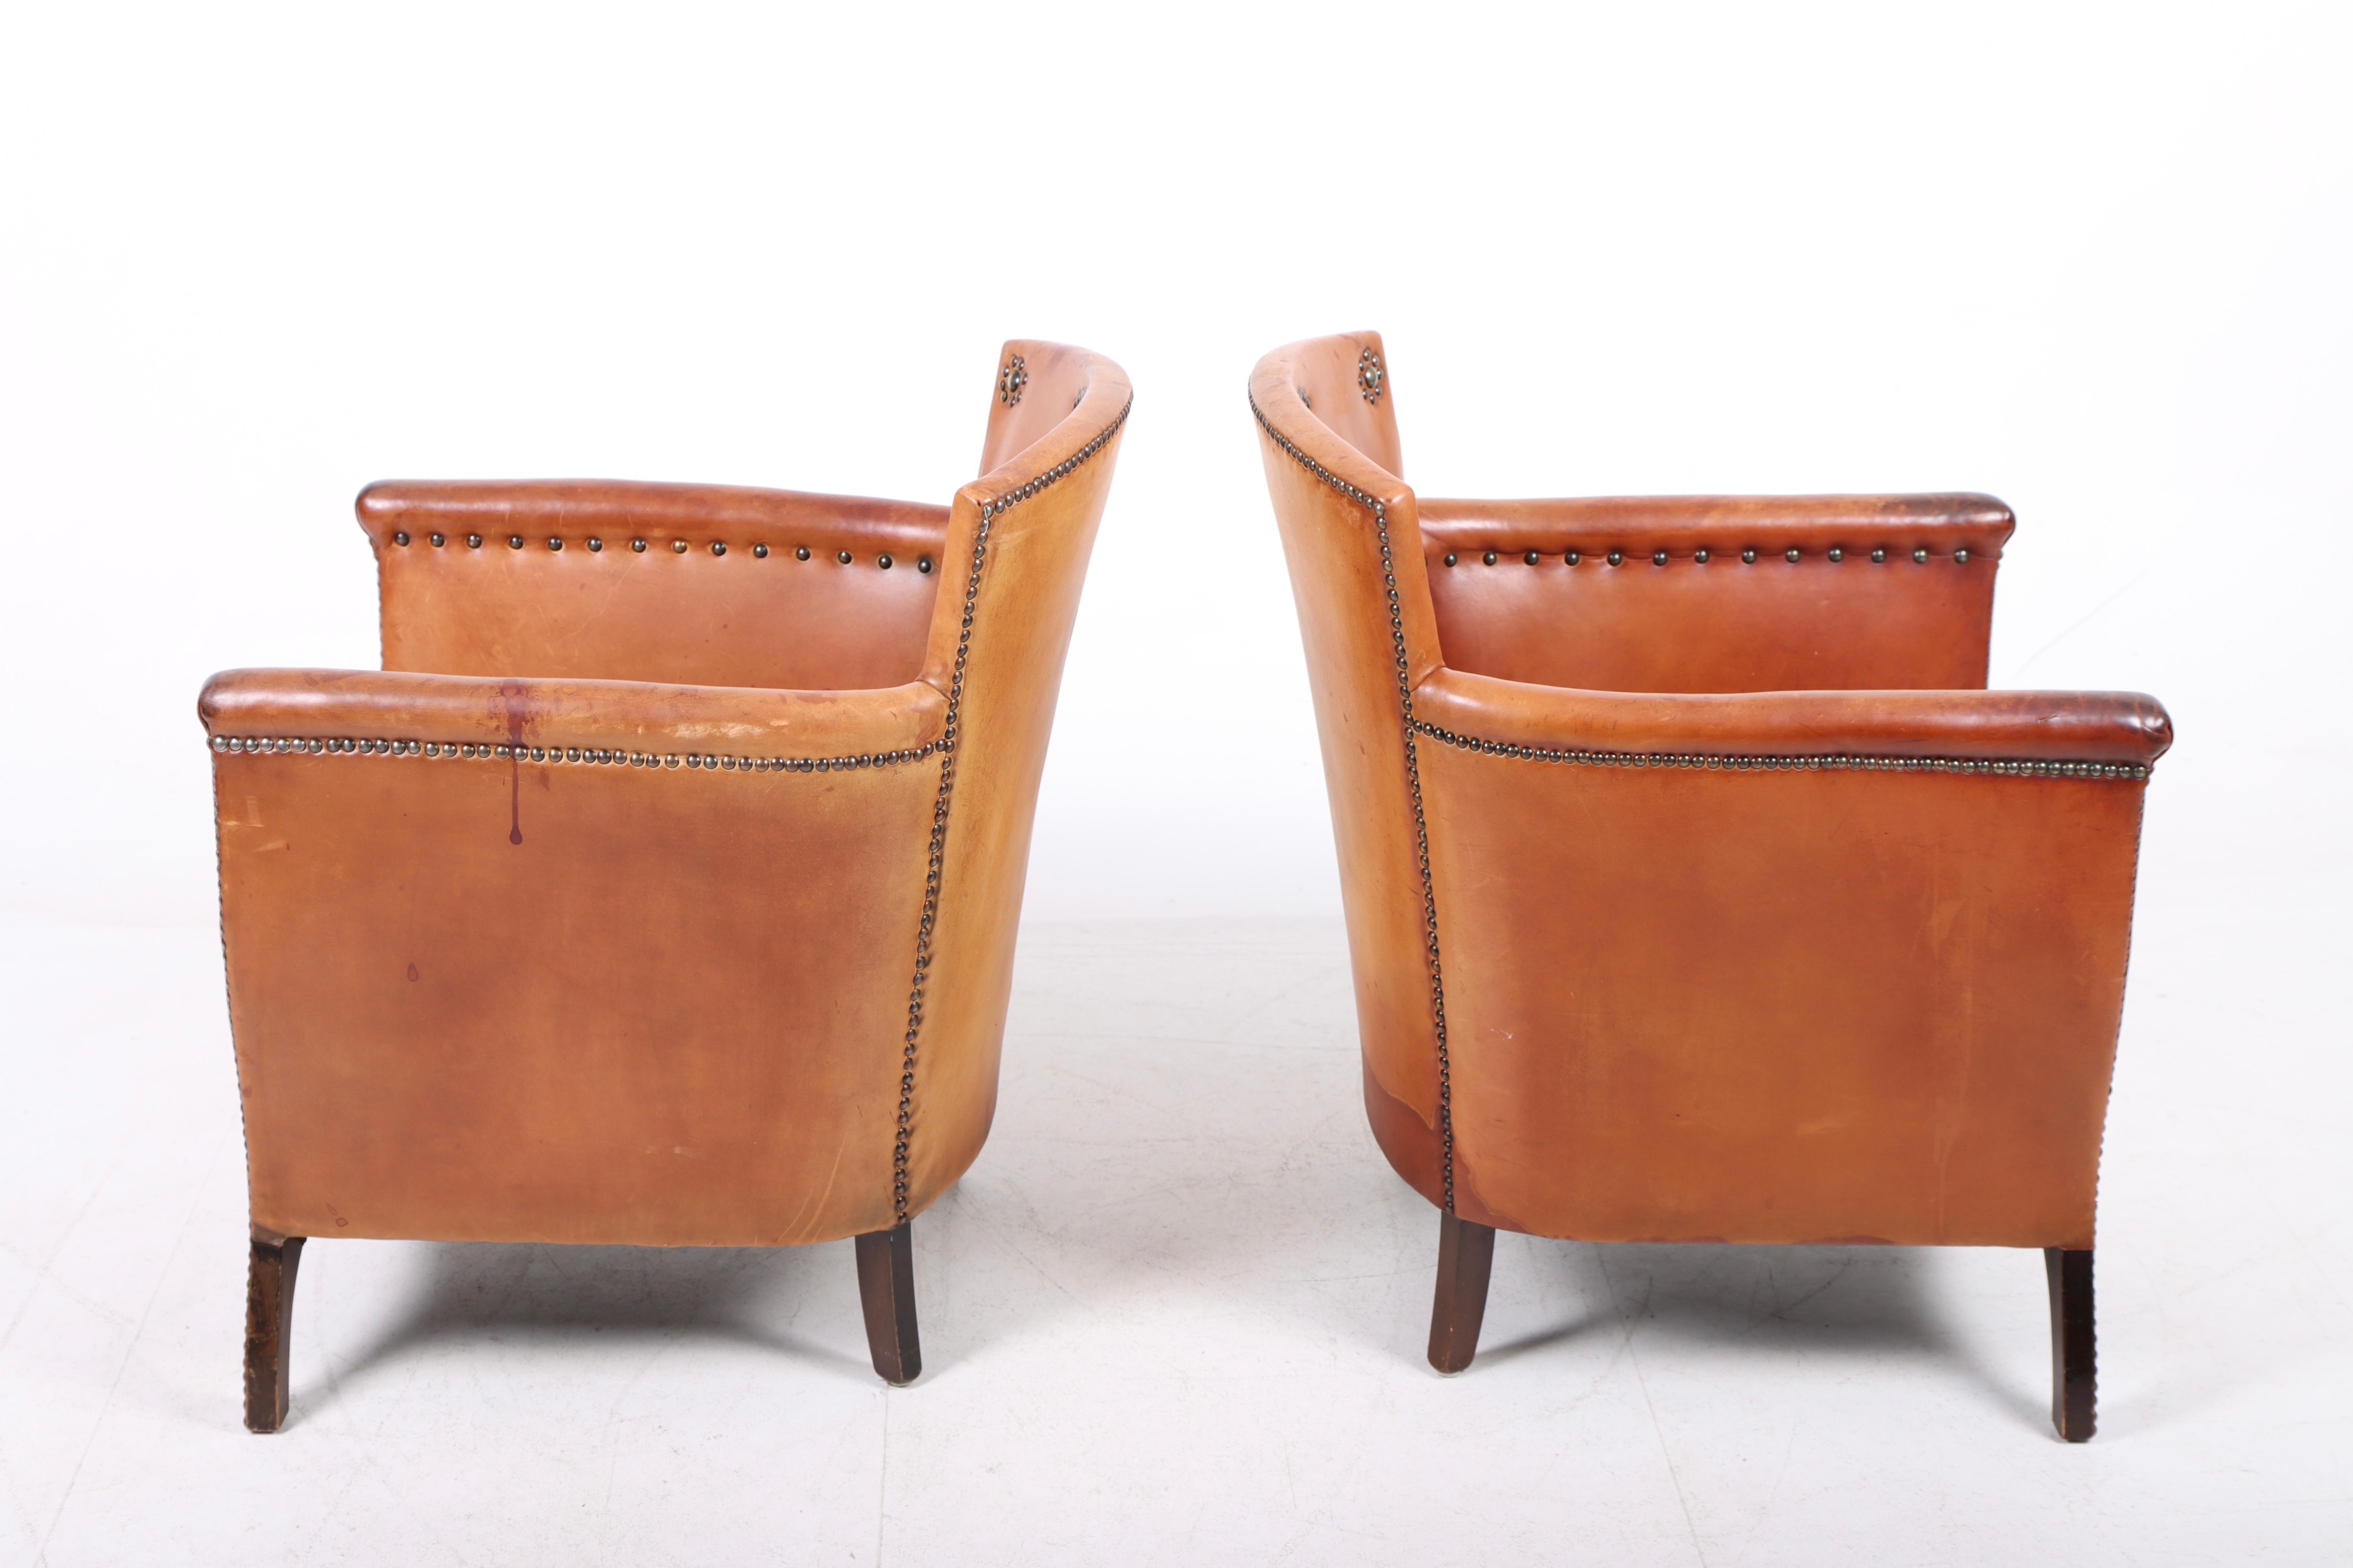 Brass Pair of Lounge Chairs in Patinated Leather and Fabric, Designed by Otto Schulz